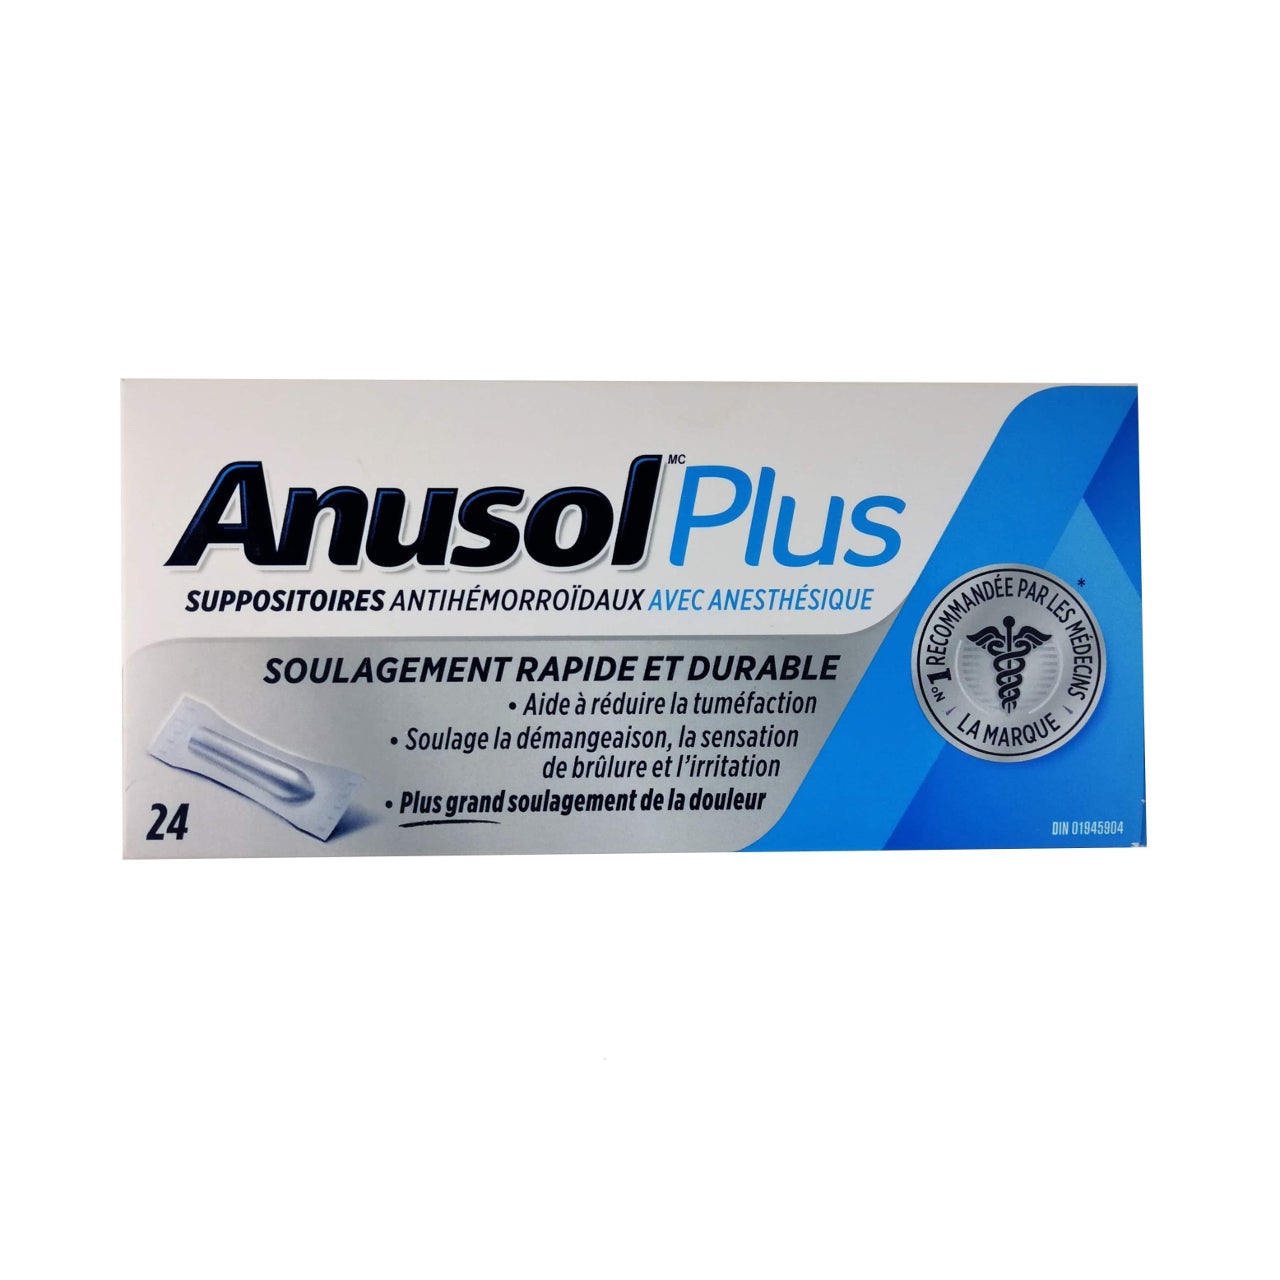 Product package for Anusol Plus Hemorrhoidal Suppositories with Anesthetic 24 pack in French